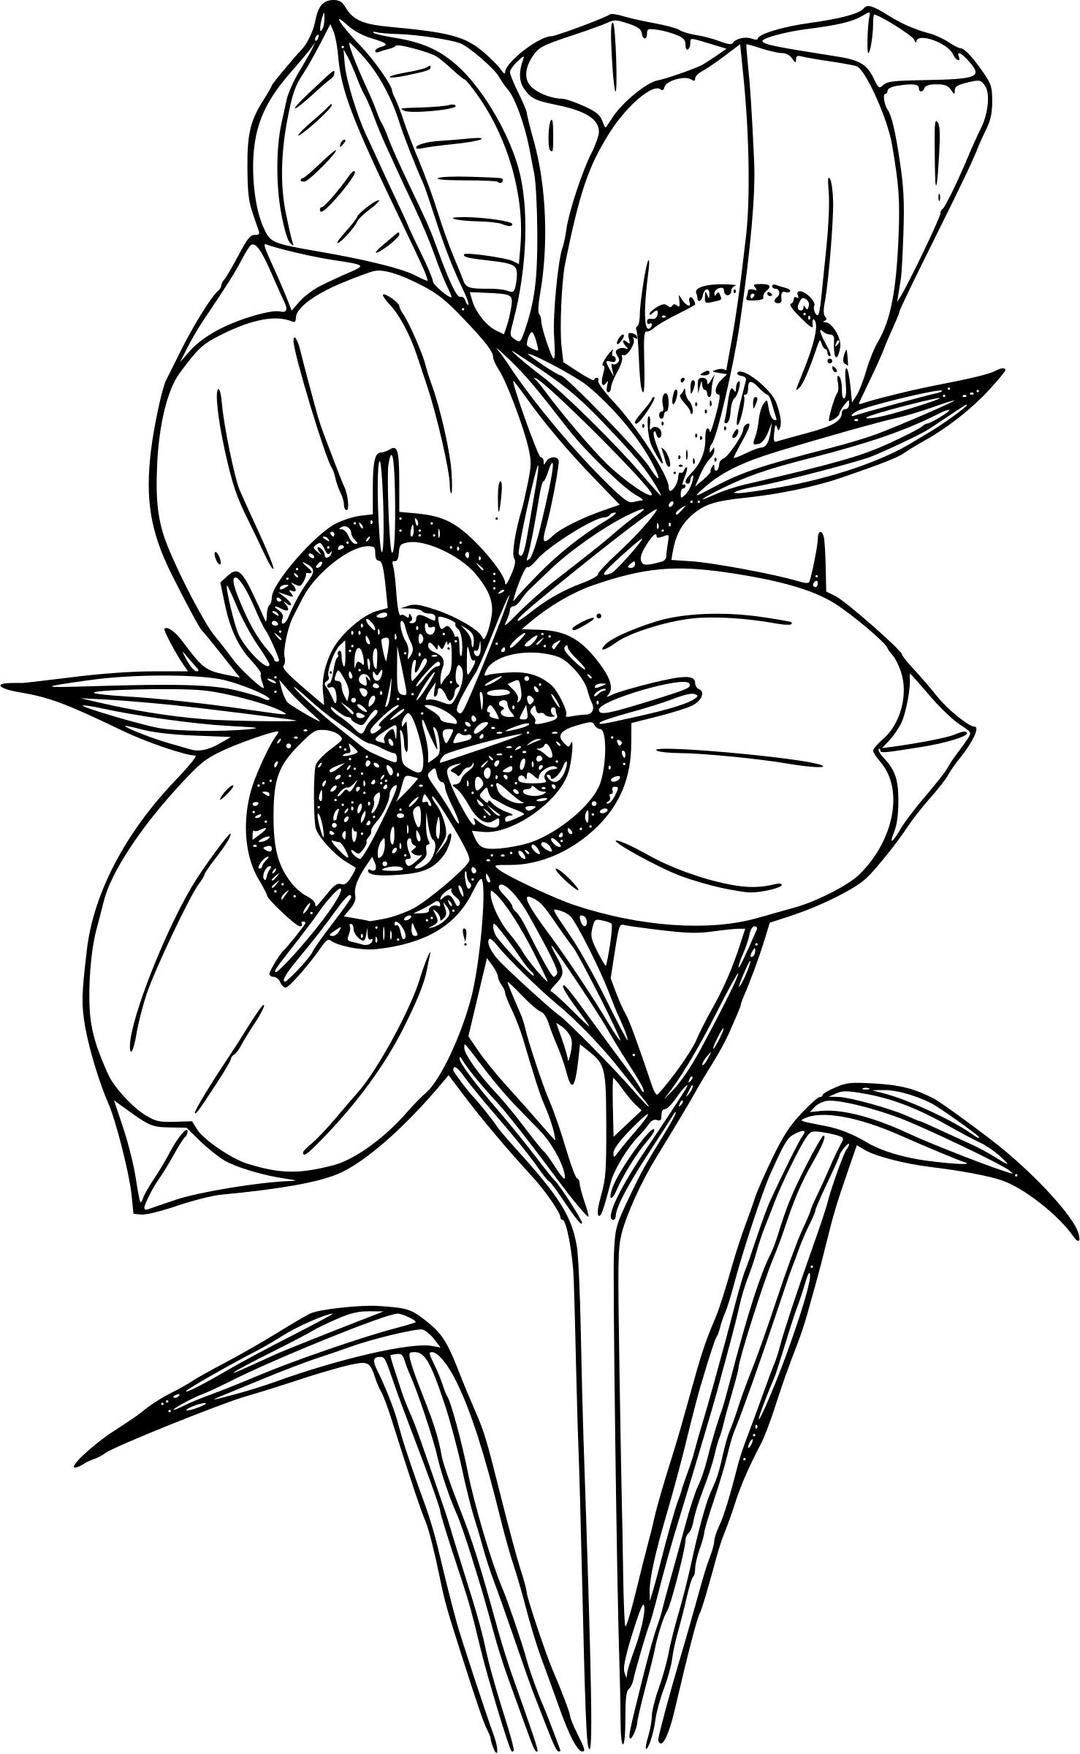 Big-podded mariposa lily png transparent